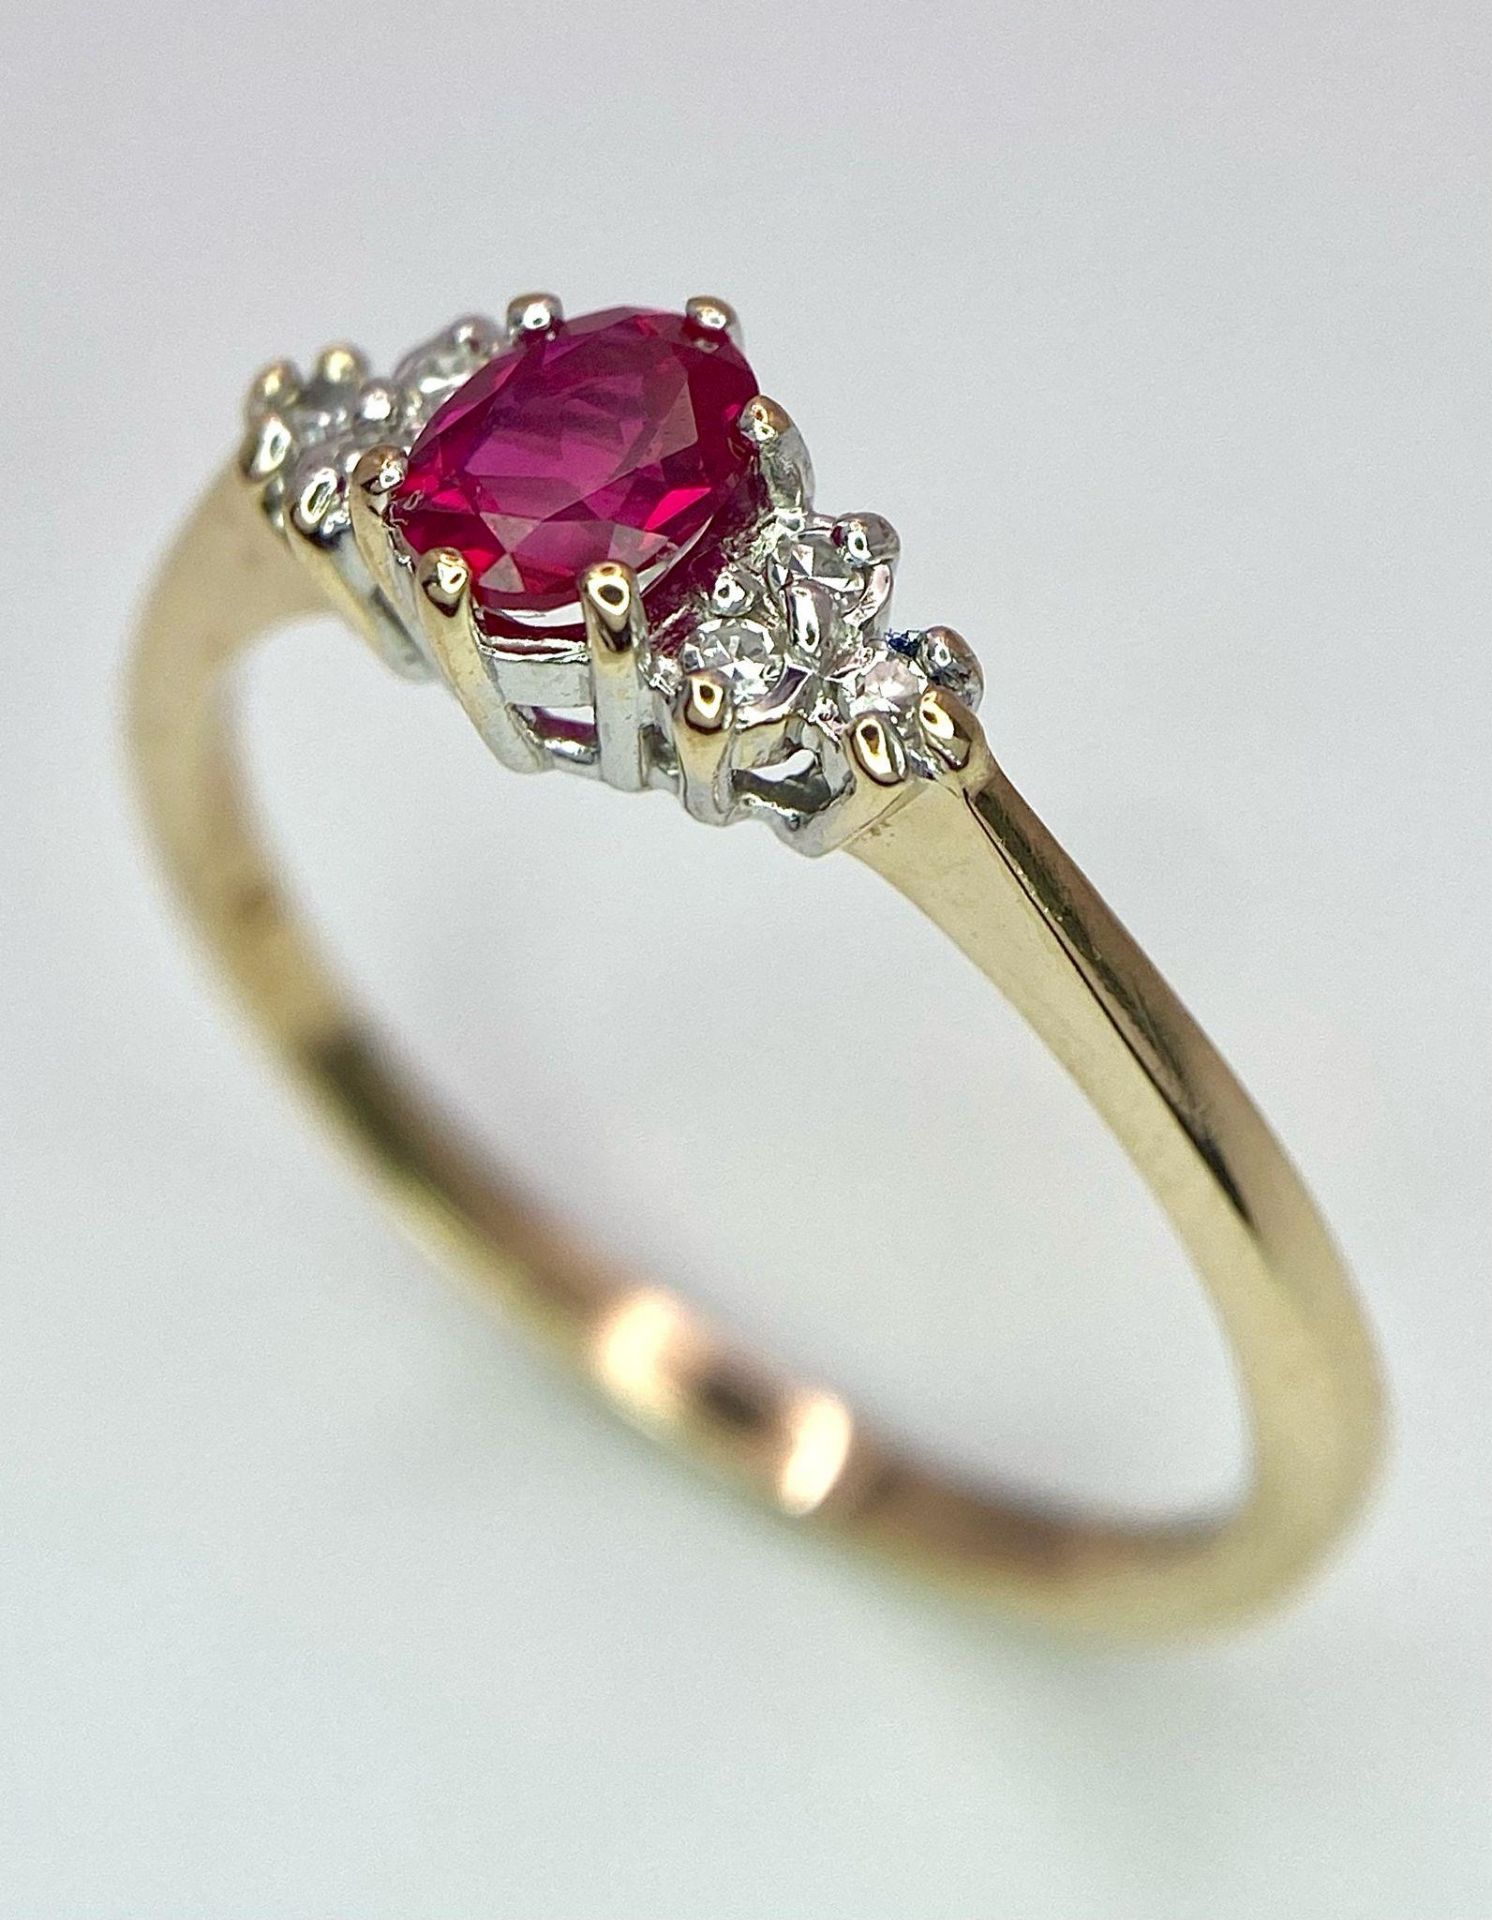 A 9K Yellow Gold Diamond & Red Stone (probably ruby) Ring. Size S, 2g total weight. Ref: 8418